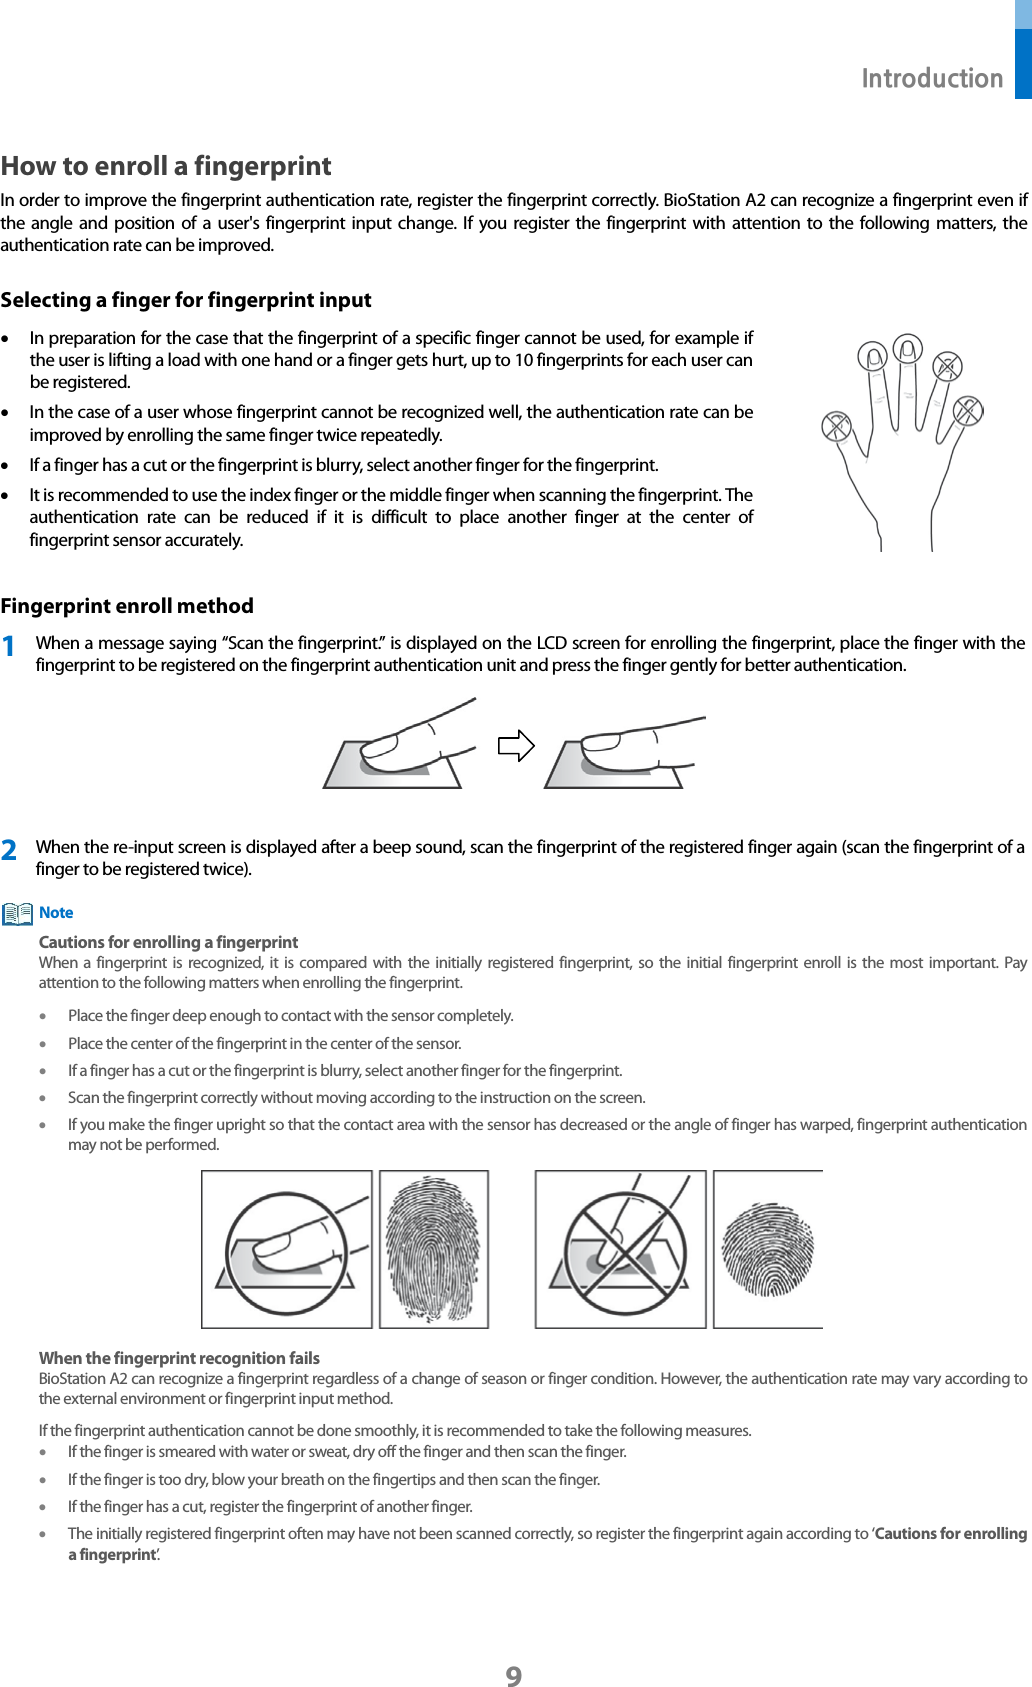  Introduction 9 How to enroll a fingerprint In order to improve the fingerprint authentication rate, register the fingerprint correctly. BioStation A2 can recognize a fingerprint even if the angle and position of a user&apos;s fingerprint input change. If you register the fingerprint with attention to the following matters, the authentication rate can be improved. Selecting a finger for fingerprint input • In preparation for the case that the fingerprint of a specific finger cannot be used, for example if the user is lifting a load with one hand or a finger gets hurt, up to 10 fingerprints for each user can be registered.   • In the case of a user whose fingerprint cannot be recognized well, the authentication rate can be improved by enrolling the same finger twice repeatedly.   • If a finger has a cut or the fingerprint is blurry, select another finger for the fingerprint. • It is recommended to use the index finger or the middle finger when scanning the fingerprint. The authentication rate can be reduced if it is difficult to place another finger at the center of fingerprint sensor accurately.  Fingerprint enroll method 1 When a message saying “Scan the fingerprint.” is displayed on the LCD screen for enrolling the fingerprint, place the finger with the fingerprint to be registered on the fingerprint authentication unit and press the finger gently for better authentication.    2 When the re-input screen is displayed after a beep sound, scan the fingerprint of the registered finger again (scan the fingerprint of a finger to be registered twice).  Cautions for enrolling a fingerprint When a fingerprint is recognized, it is compared with the initially registered fingerprint, so the initial fingerprint enroll  is the most important. Pay attention to the following matters when enrolling the fingerprint. • Place the finger deep enough to contact with the sensor completely. • Place the center of the fingerprint in the center of the sensor.   • If a finger has a cut or the fingerprint is blurry, select another finger for the fingerprint.   • Scan the fingerprint correctly without moving according to the instruction on the screen.   • If you make the finger upright so that the contact area with the sensor has decreased or the angle of finger has warped, fingerprint authentication may not be performed.    When the fingerprint recognition fails BioStation A2 can recognize a fingerprint regardless of a change of season or finger condition. However, the authentication rate may vary according to the external environment or fingerprint input method.   If the fingerprint authentication cannot be done smoothly, it is recommended to take the following measures.   • If the finger is smeared with water or sweat, dry off the finger and then scan the finger. • If the finger is too dry, blow your breath on the fingertips and then scan the finger. • If the finger has a cut, register the fingerprint of another finger. • The initially registered fingerprint often may have not been scanned correctly, so register the fingerprint again according to ‘Cautions for enrolling a fingerprint’.       Note 